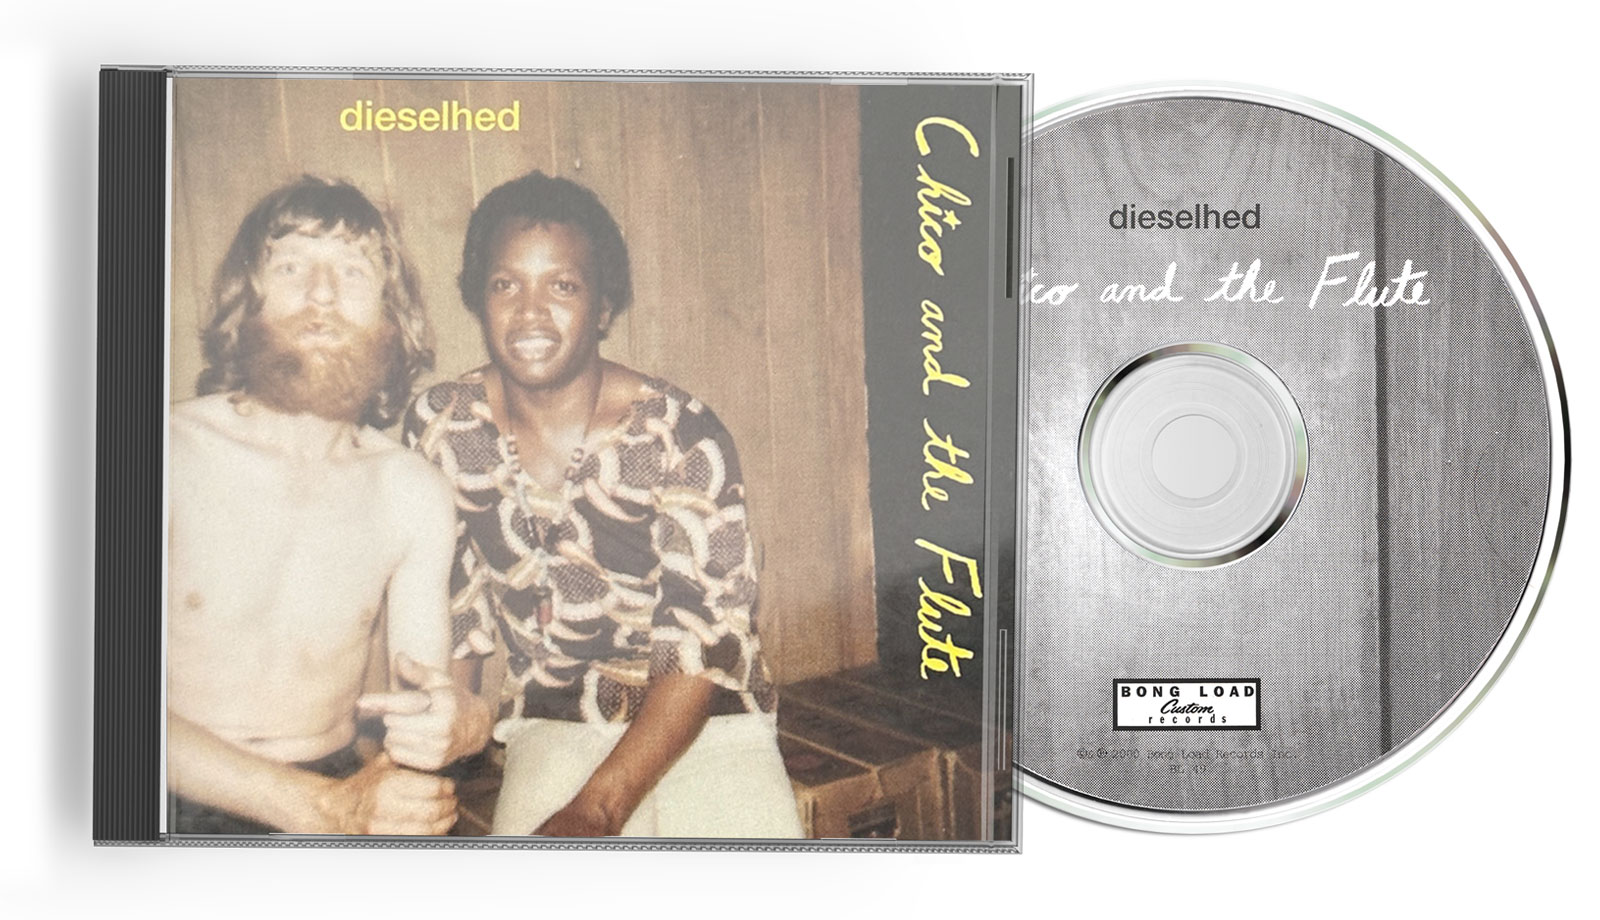 Dieselhed Chico and the Flute CD Album Cover